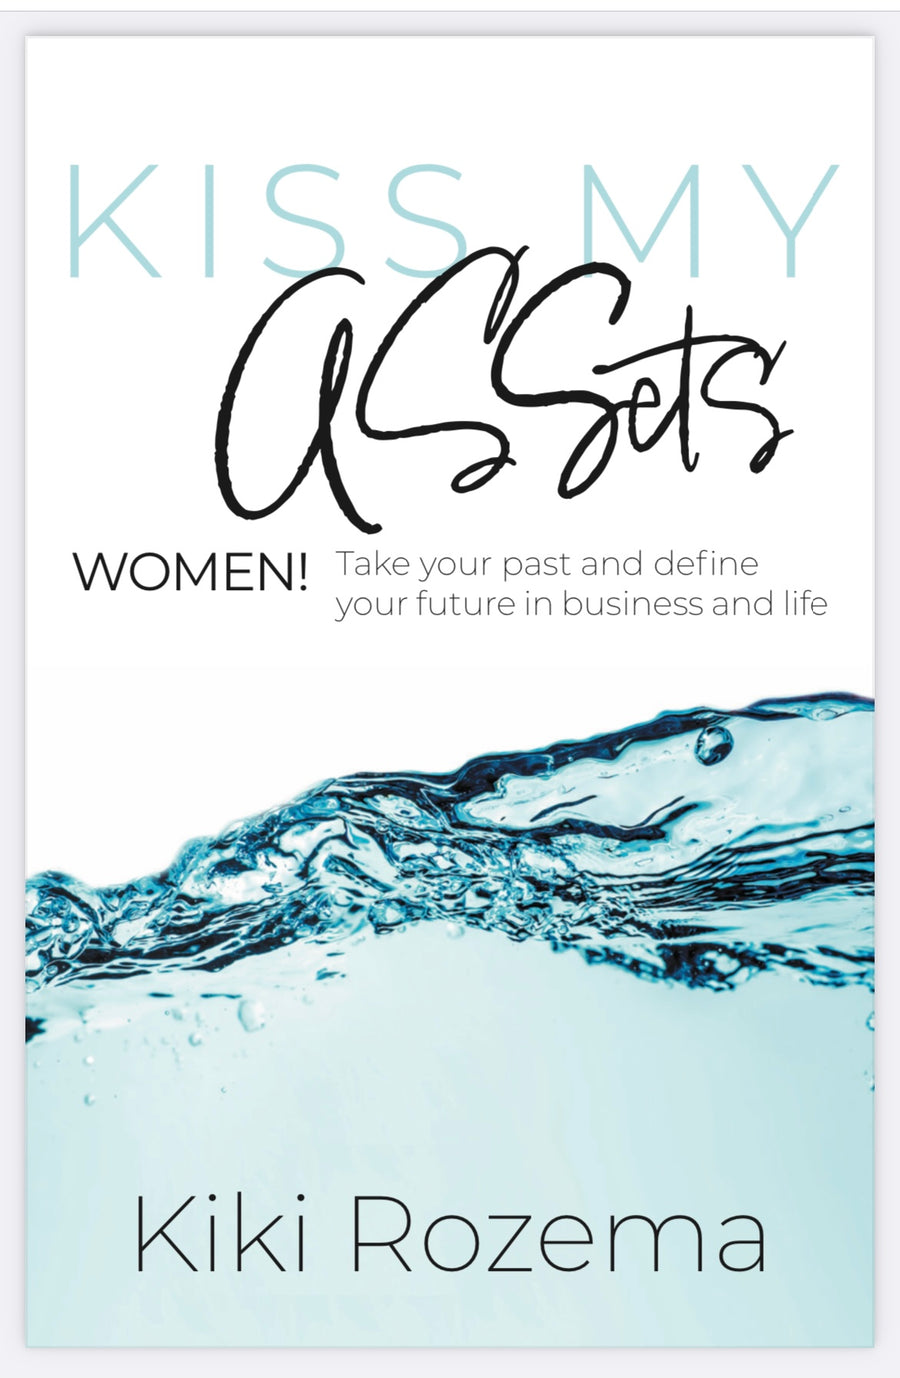 kiss my assets: women! take your past and define your future success in business and in life